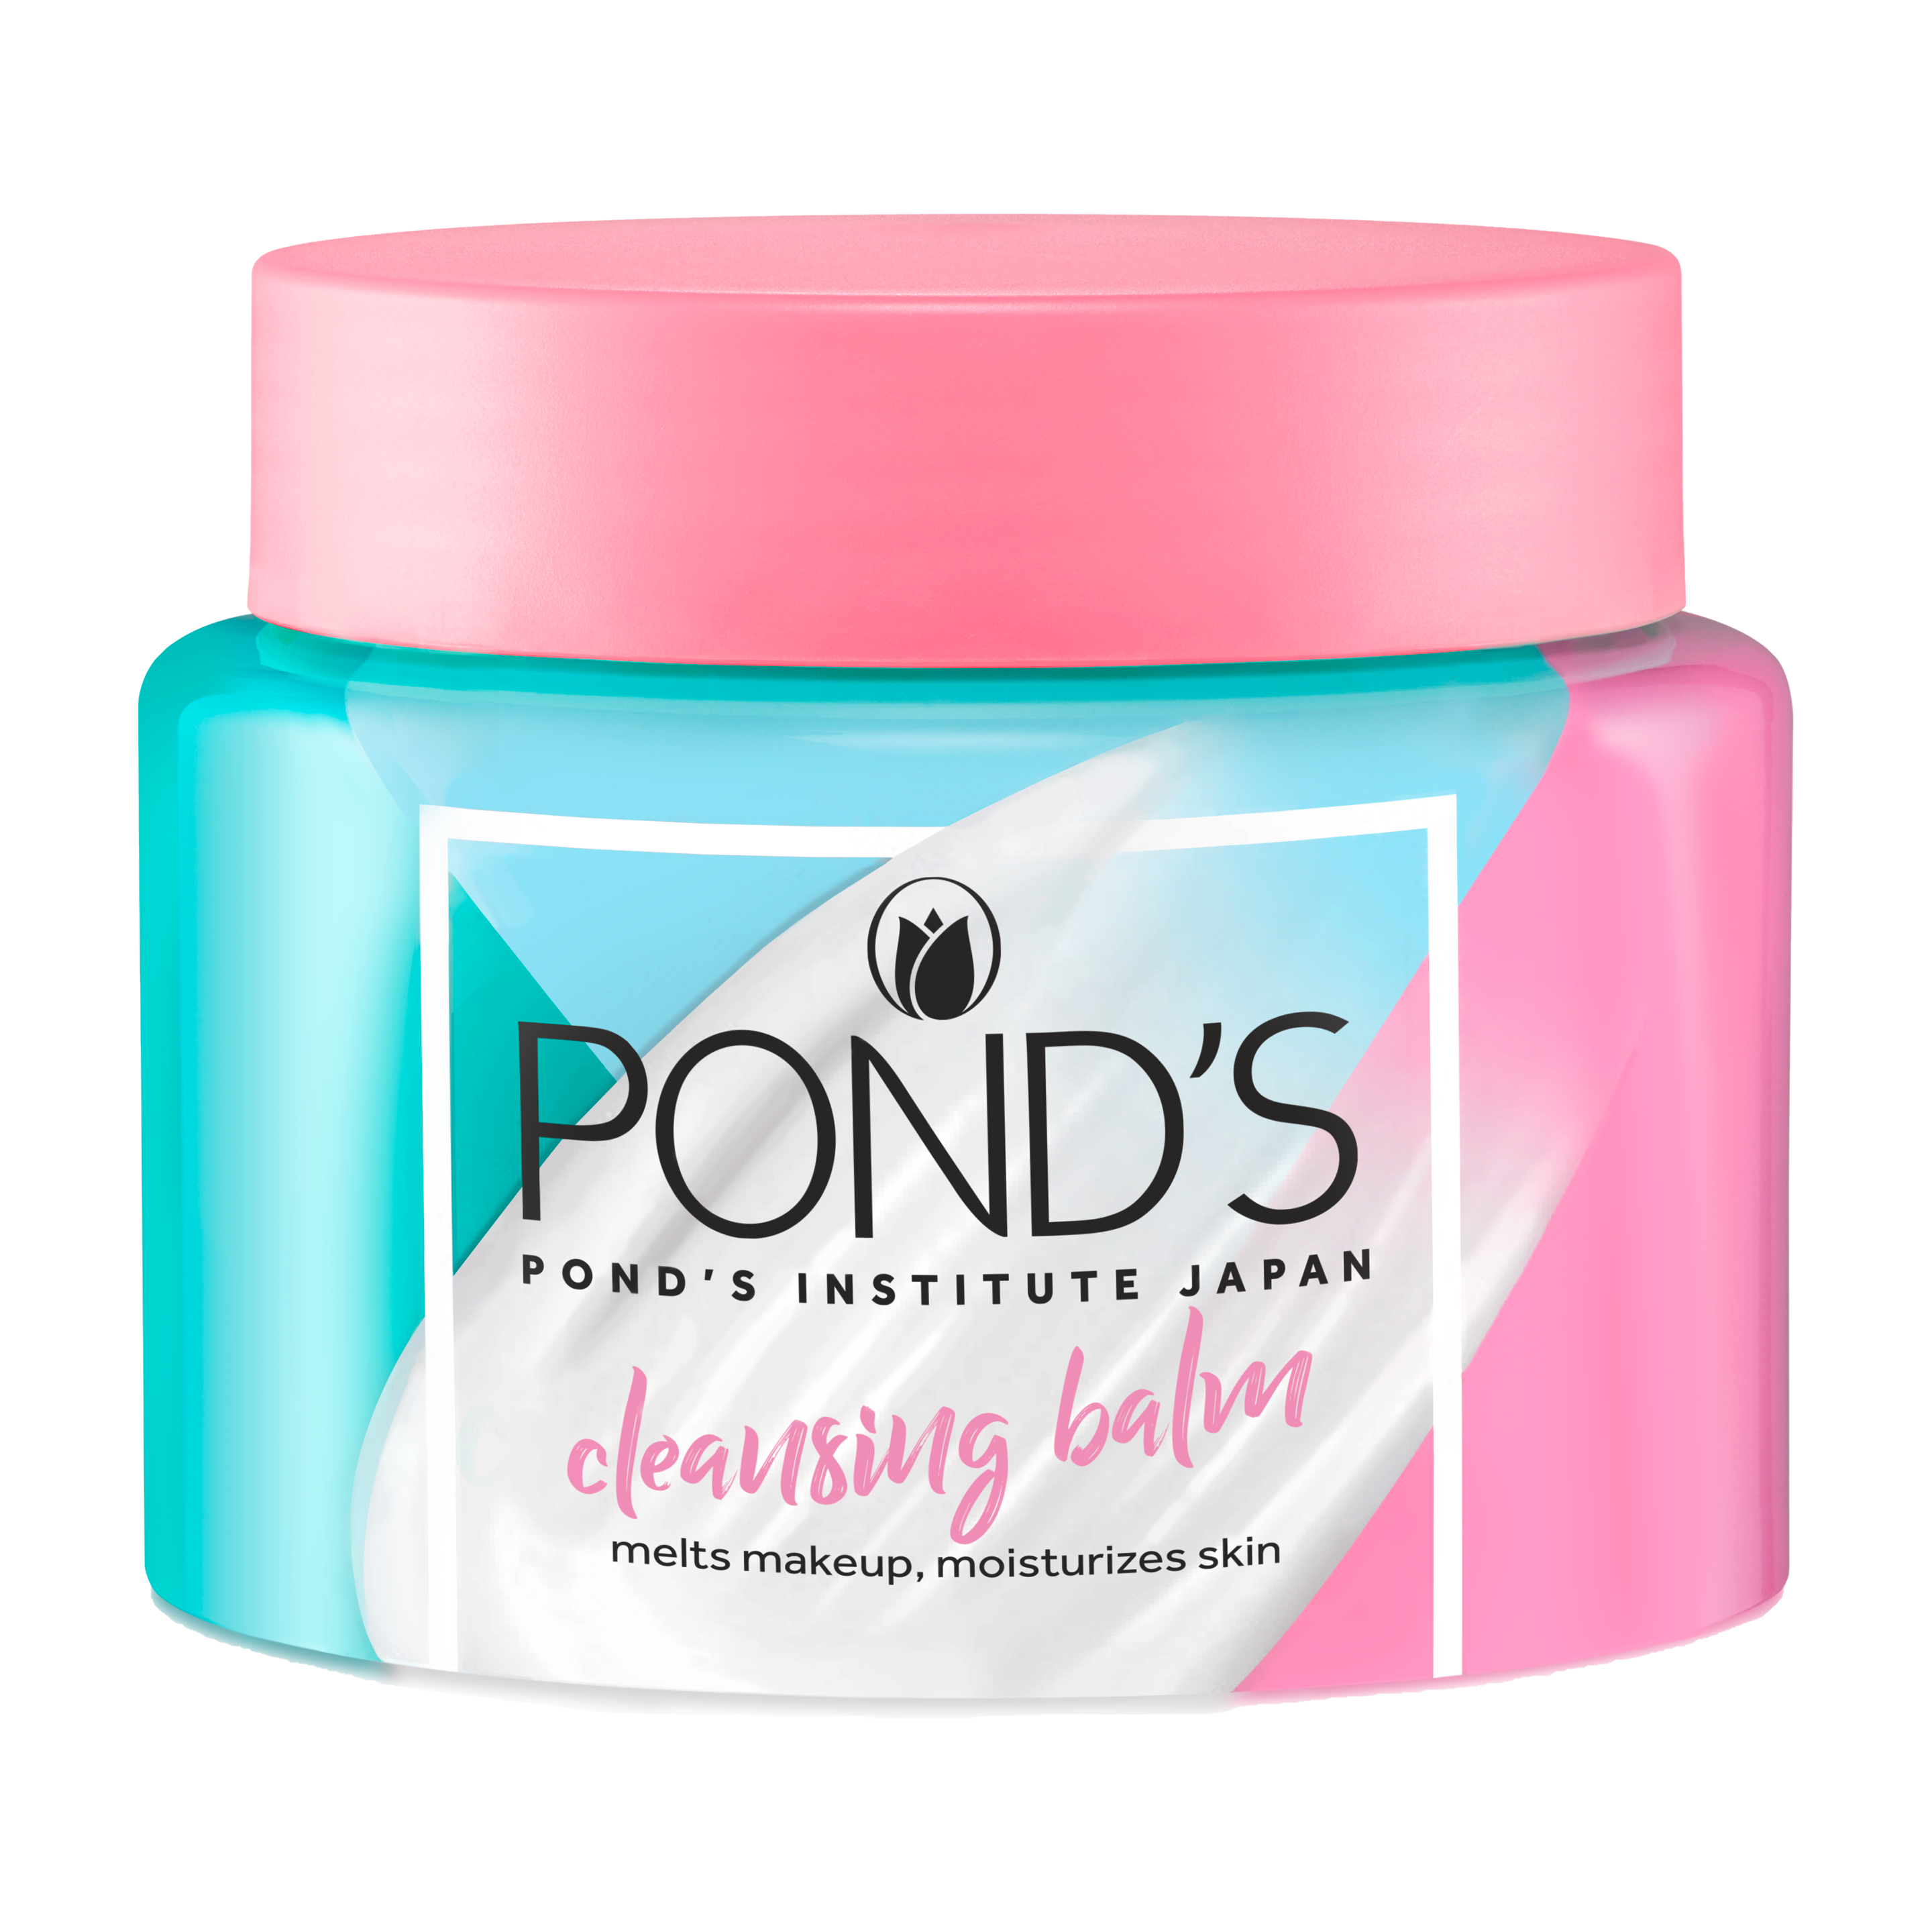 POND'S Cleansing Balm